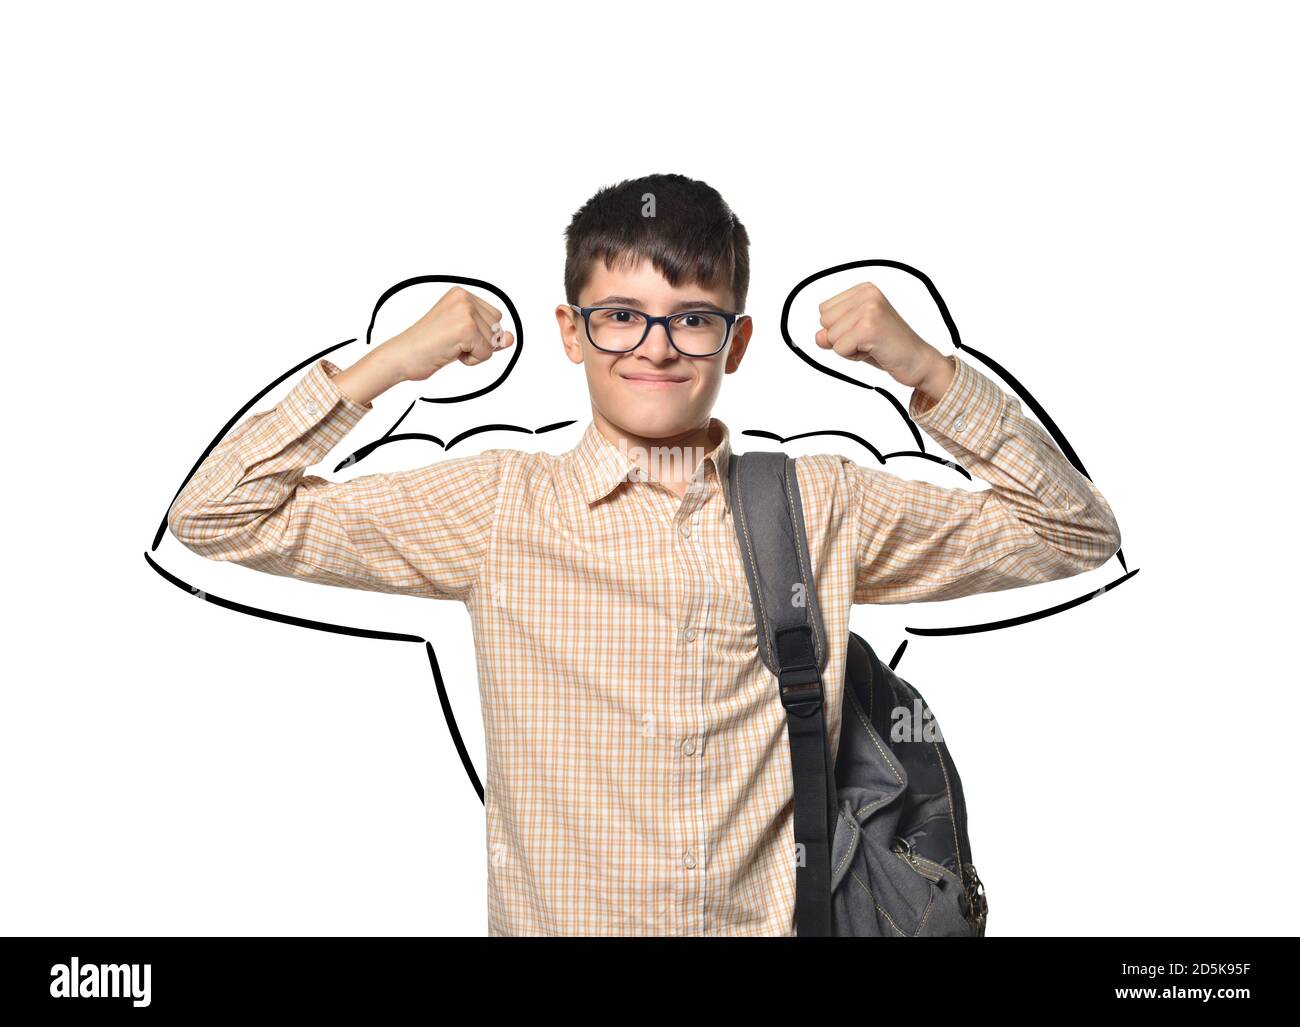 Funny schoolboy boy shows that he is strong and smart, on a white isolated background Stock Photo